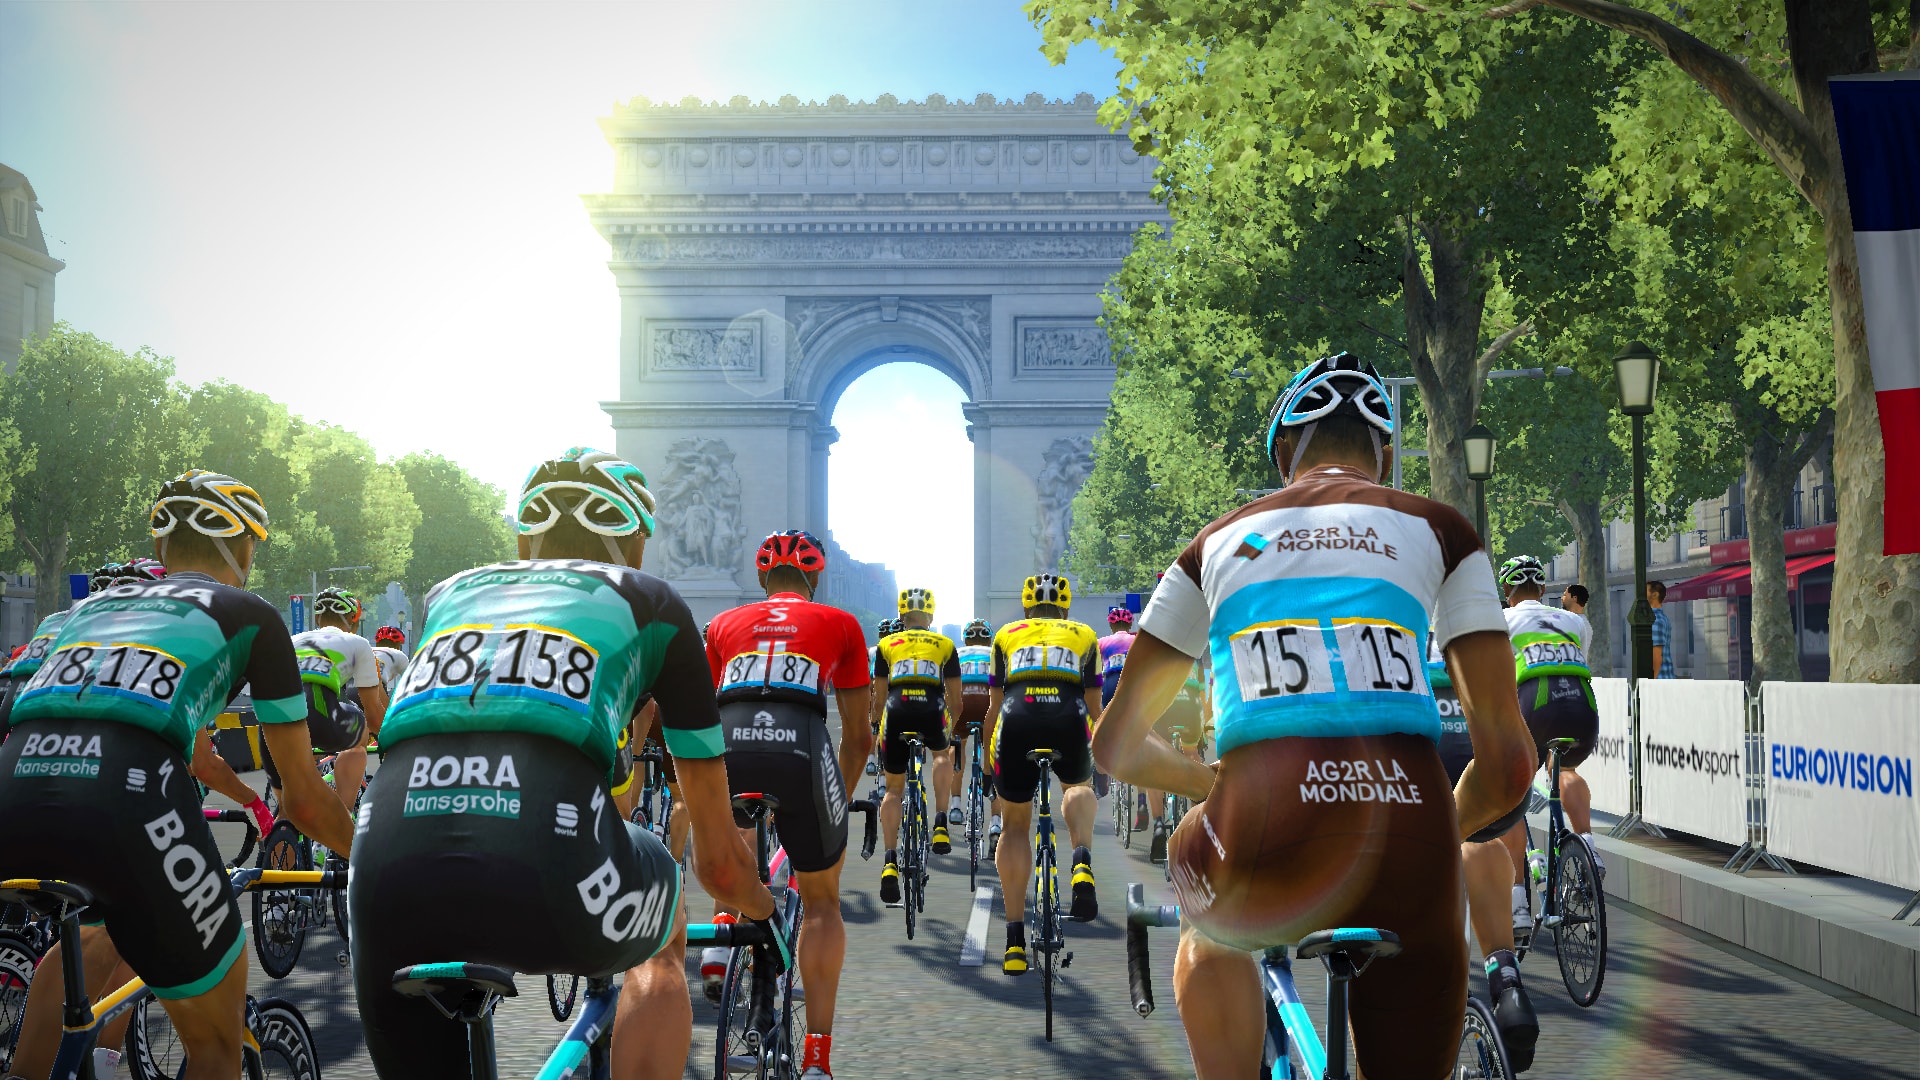 Action, Bigben Interactive, Cyanide Studio, cycling, Maximum Games, Racing, Rating 6/10, simulation, Sports, Tour de France, Tour de France Review, Tour de France Season 2019, Tour de France Season 2019 Review, Xbox One, Xbox One Review